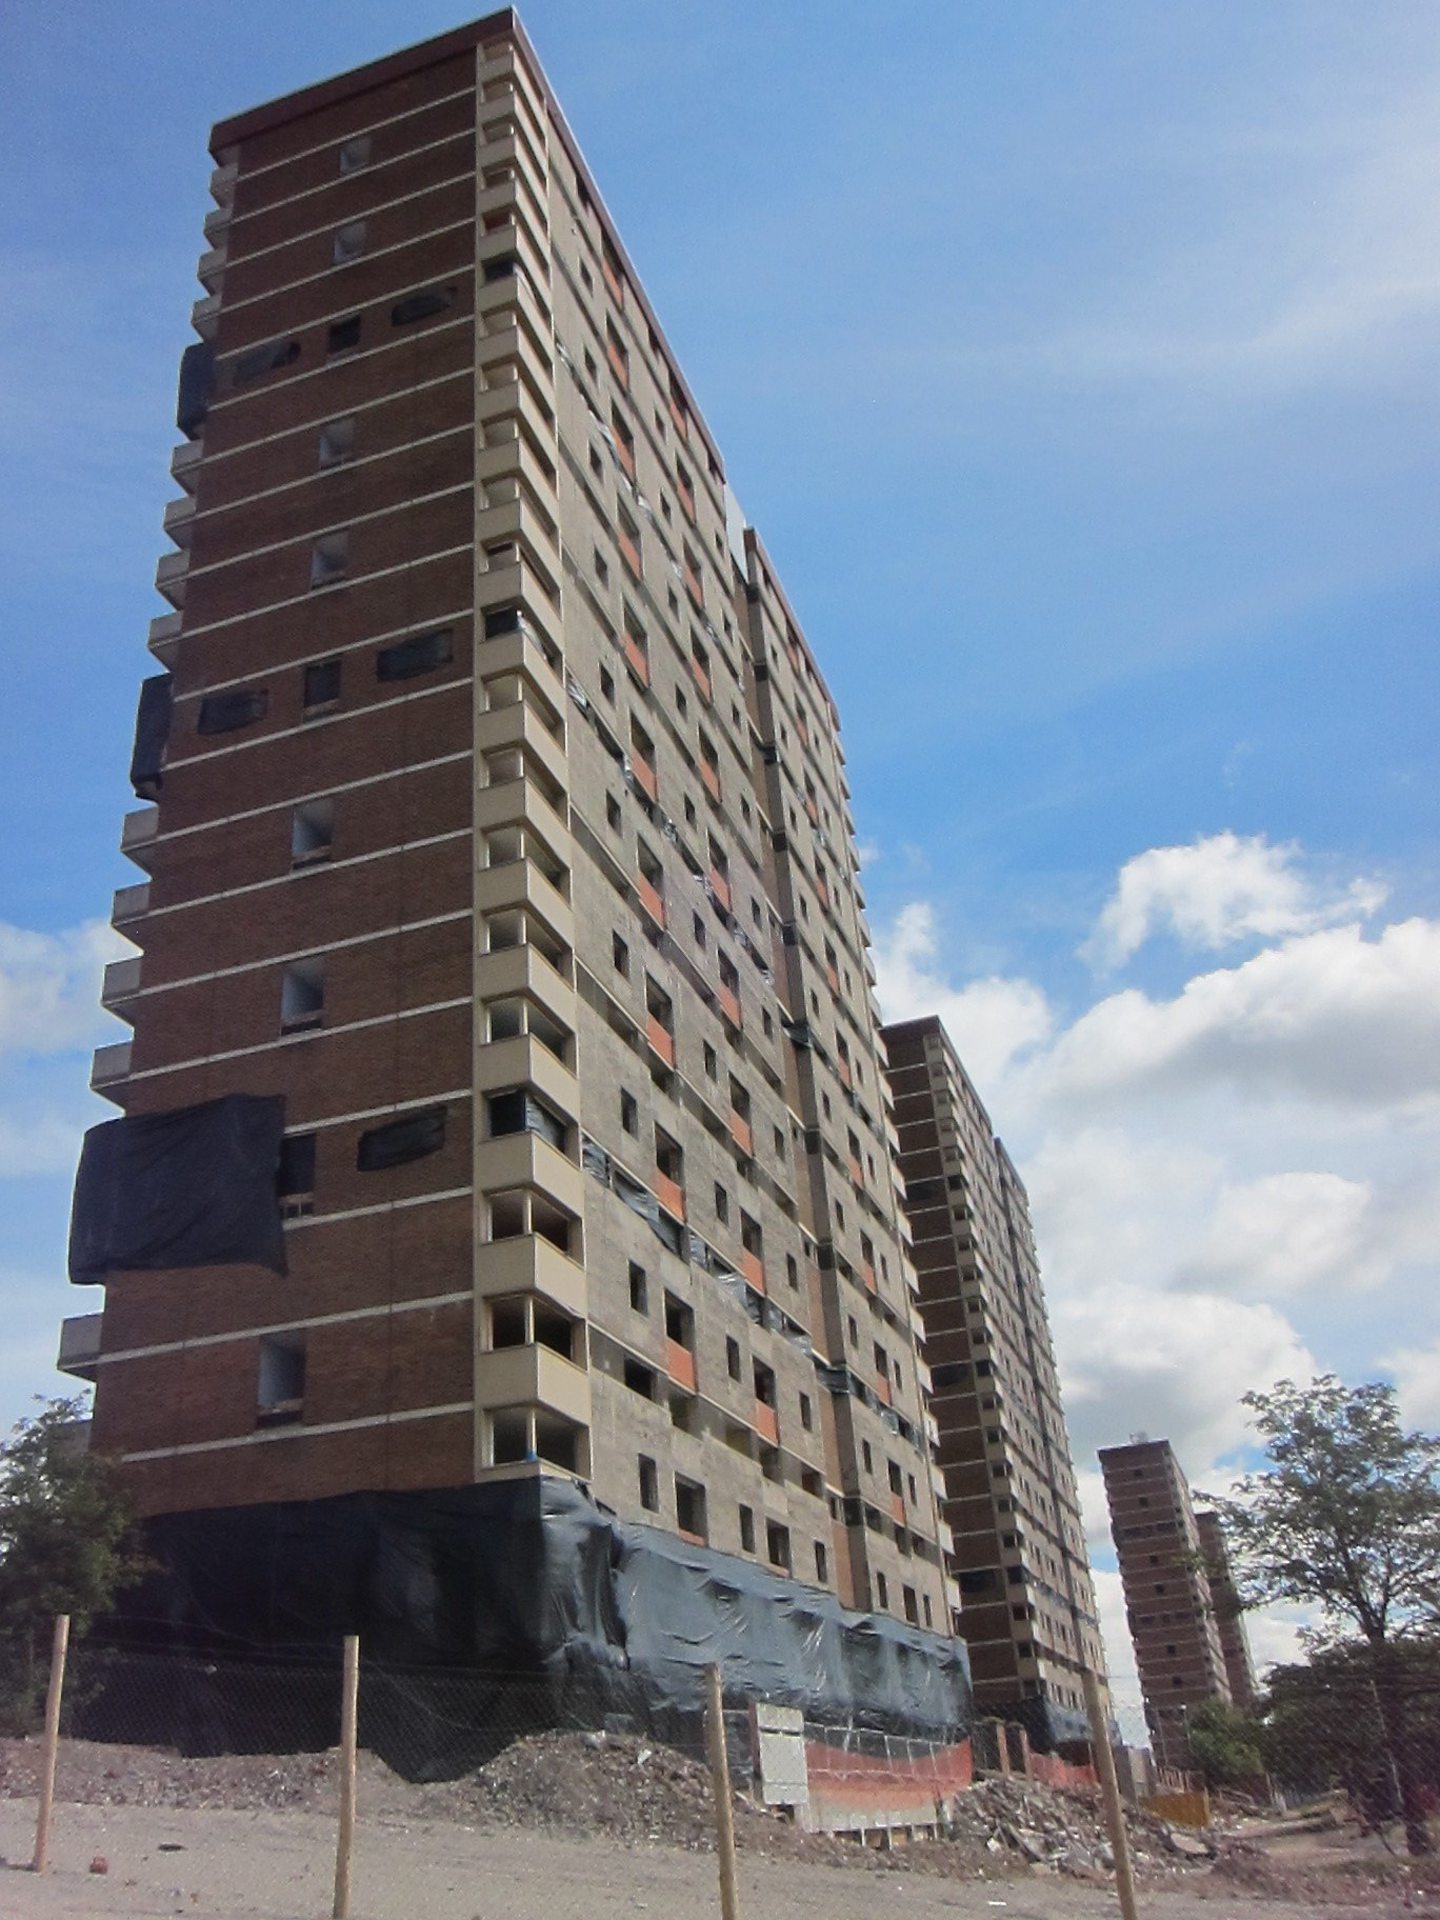 The Hilltown multi-storey blocks at Alexander Street before demolition in 2011. Image: Front Lounge.